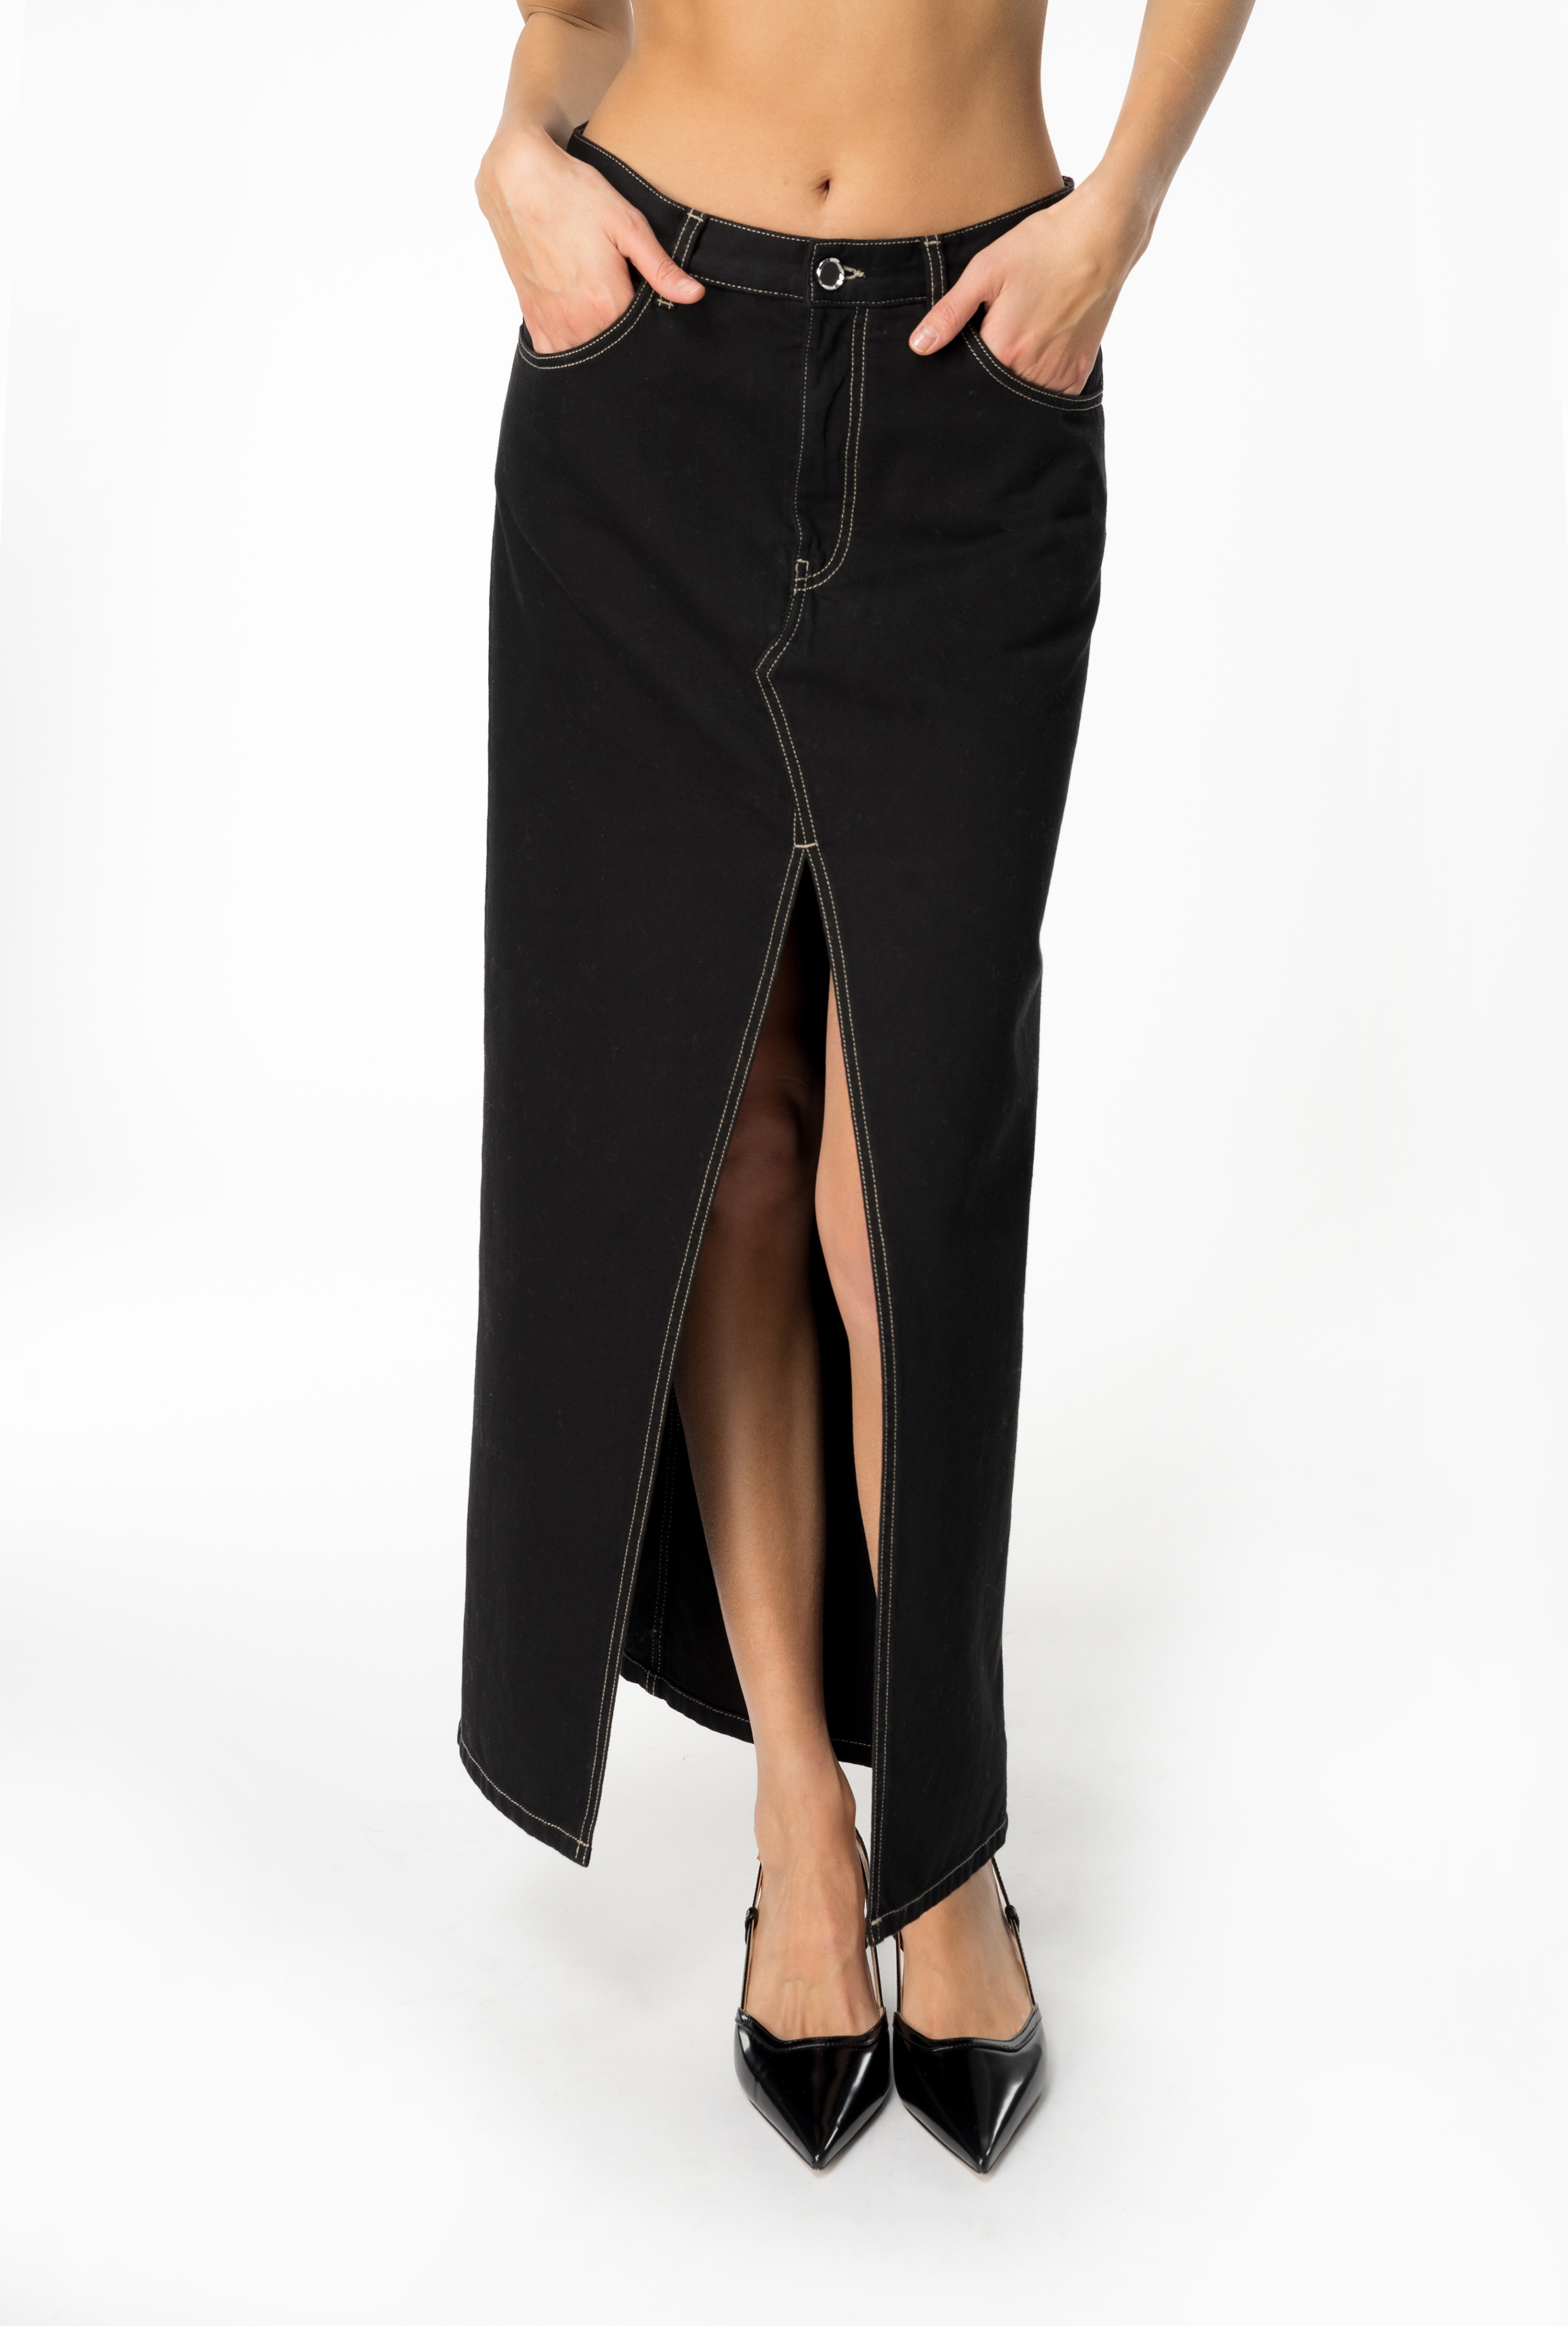 MAXI SKIRT WITH SLIT - 4